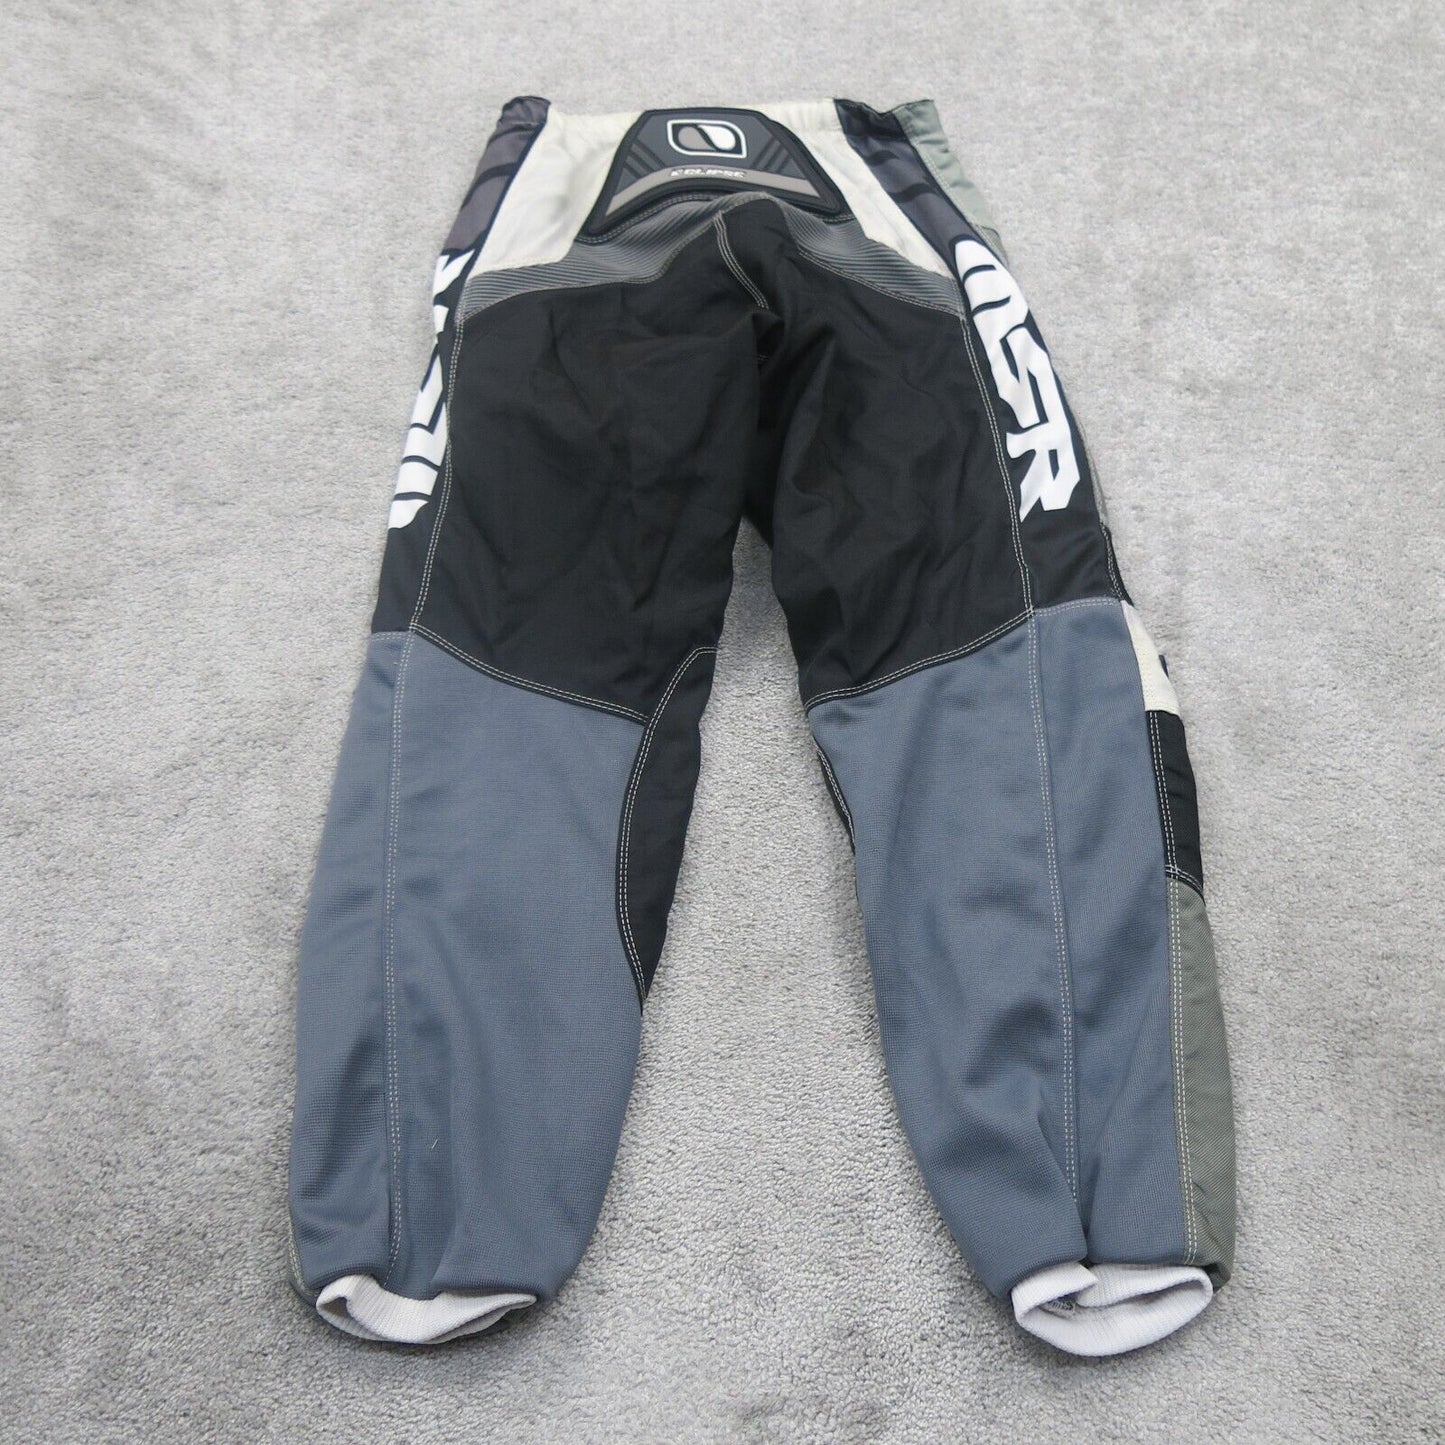 MSR Mens Sports Motorcycle Pants Mid Rise Flat Front Gray Black Size 30